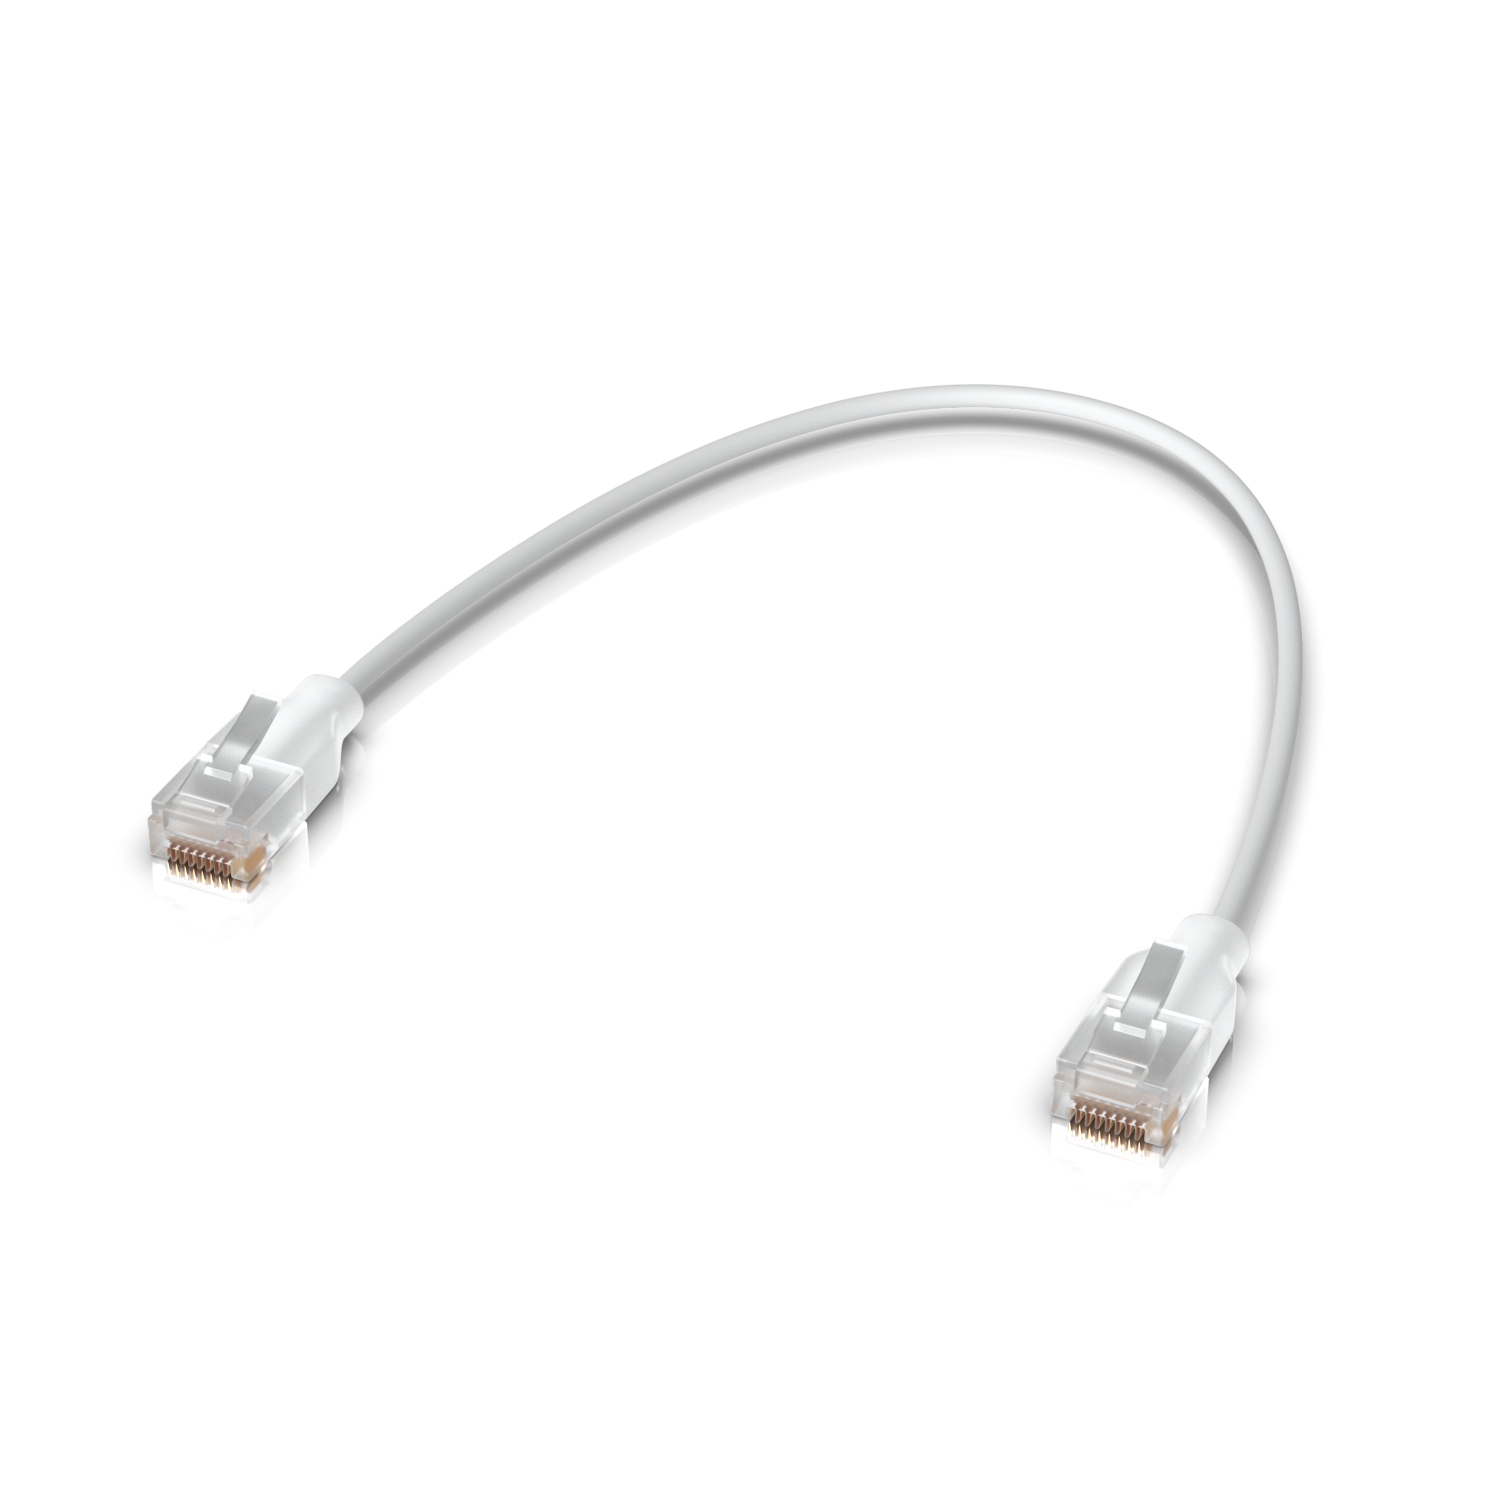 Ubiquiti UniFi Etherlighting Patch Cable, 24 Pack, Indoor, 0.15m, White/Translucent, Incl 2Yr Warr